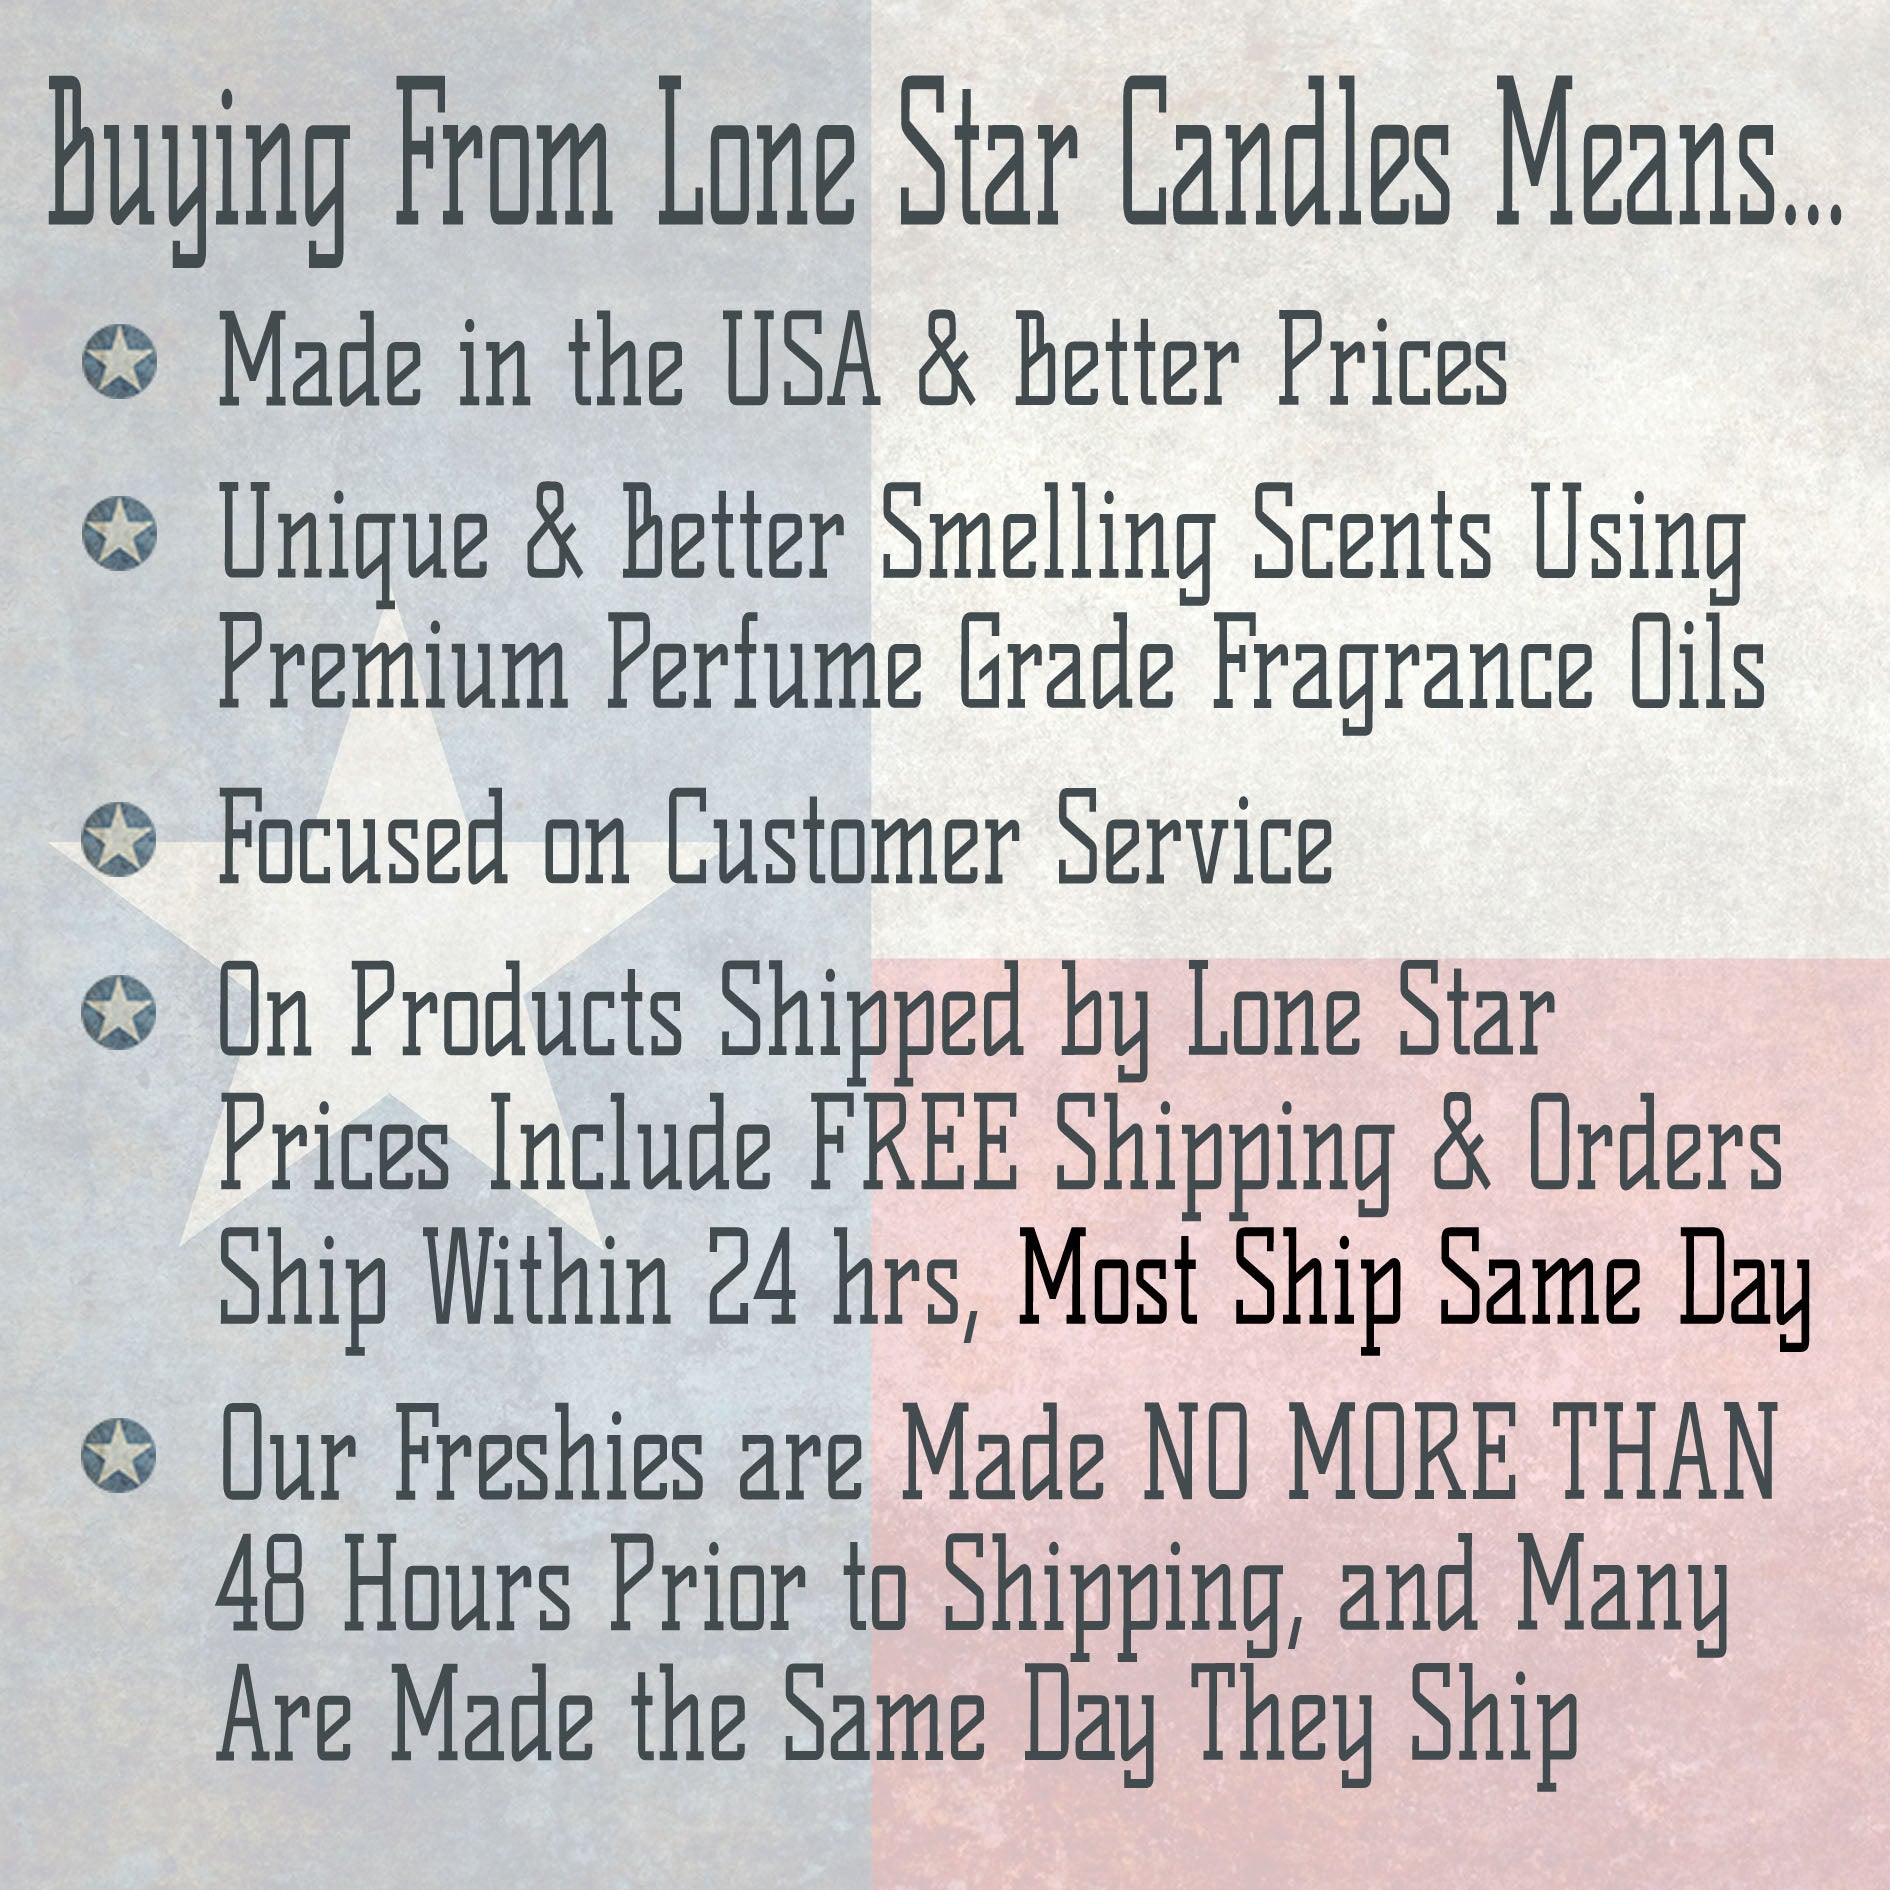 Strawberry Leather, Lone Star Candles & More's Premium Strongly Scented Freshies, Genuine Leather Aroma with Sweet & Juicy Strawberries, Car & Air Freshener, USA & Texas Made, Christmas Tree 1-Pack